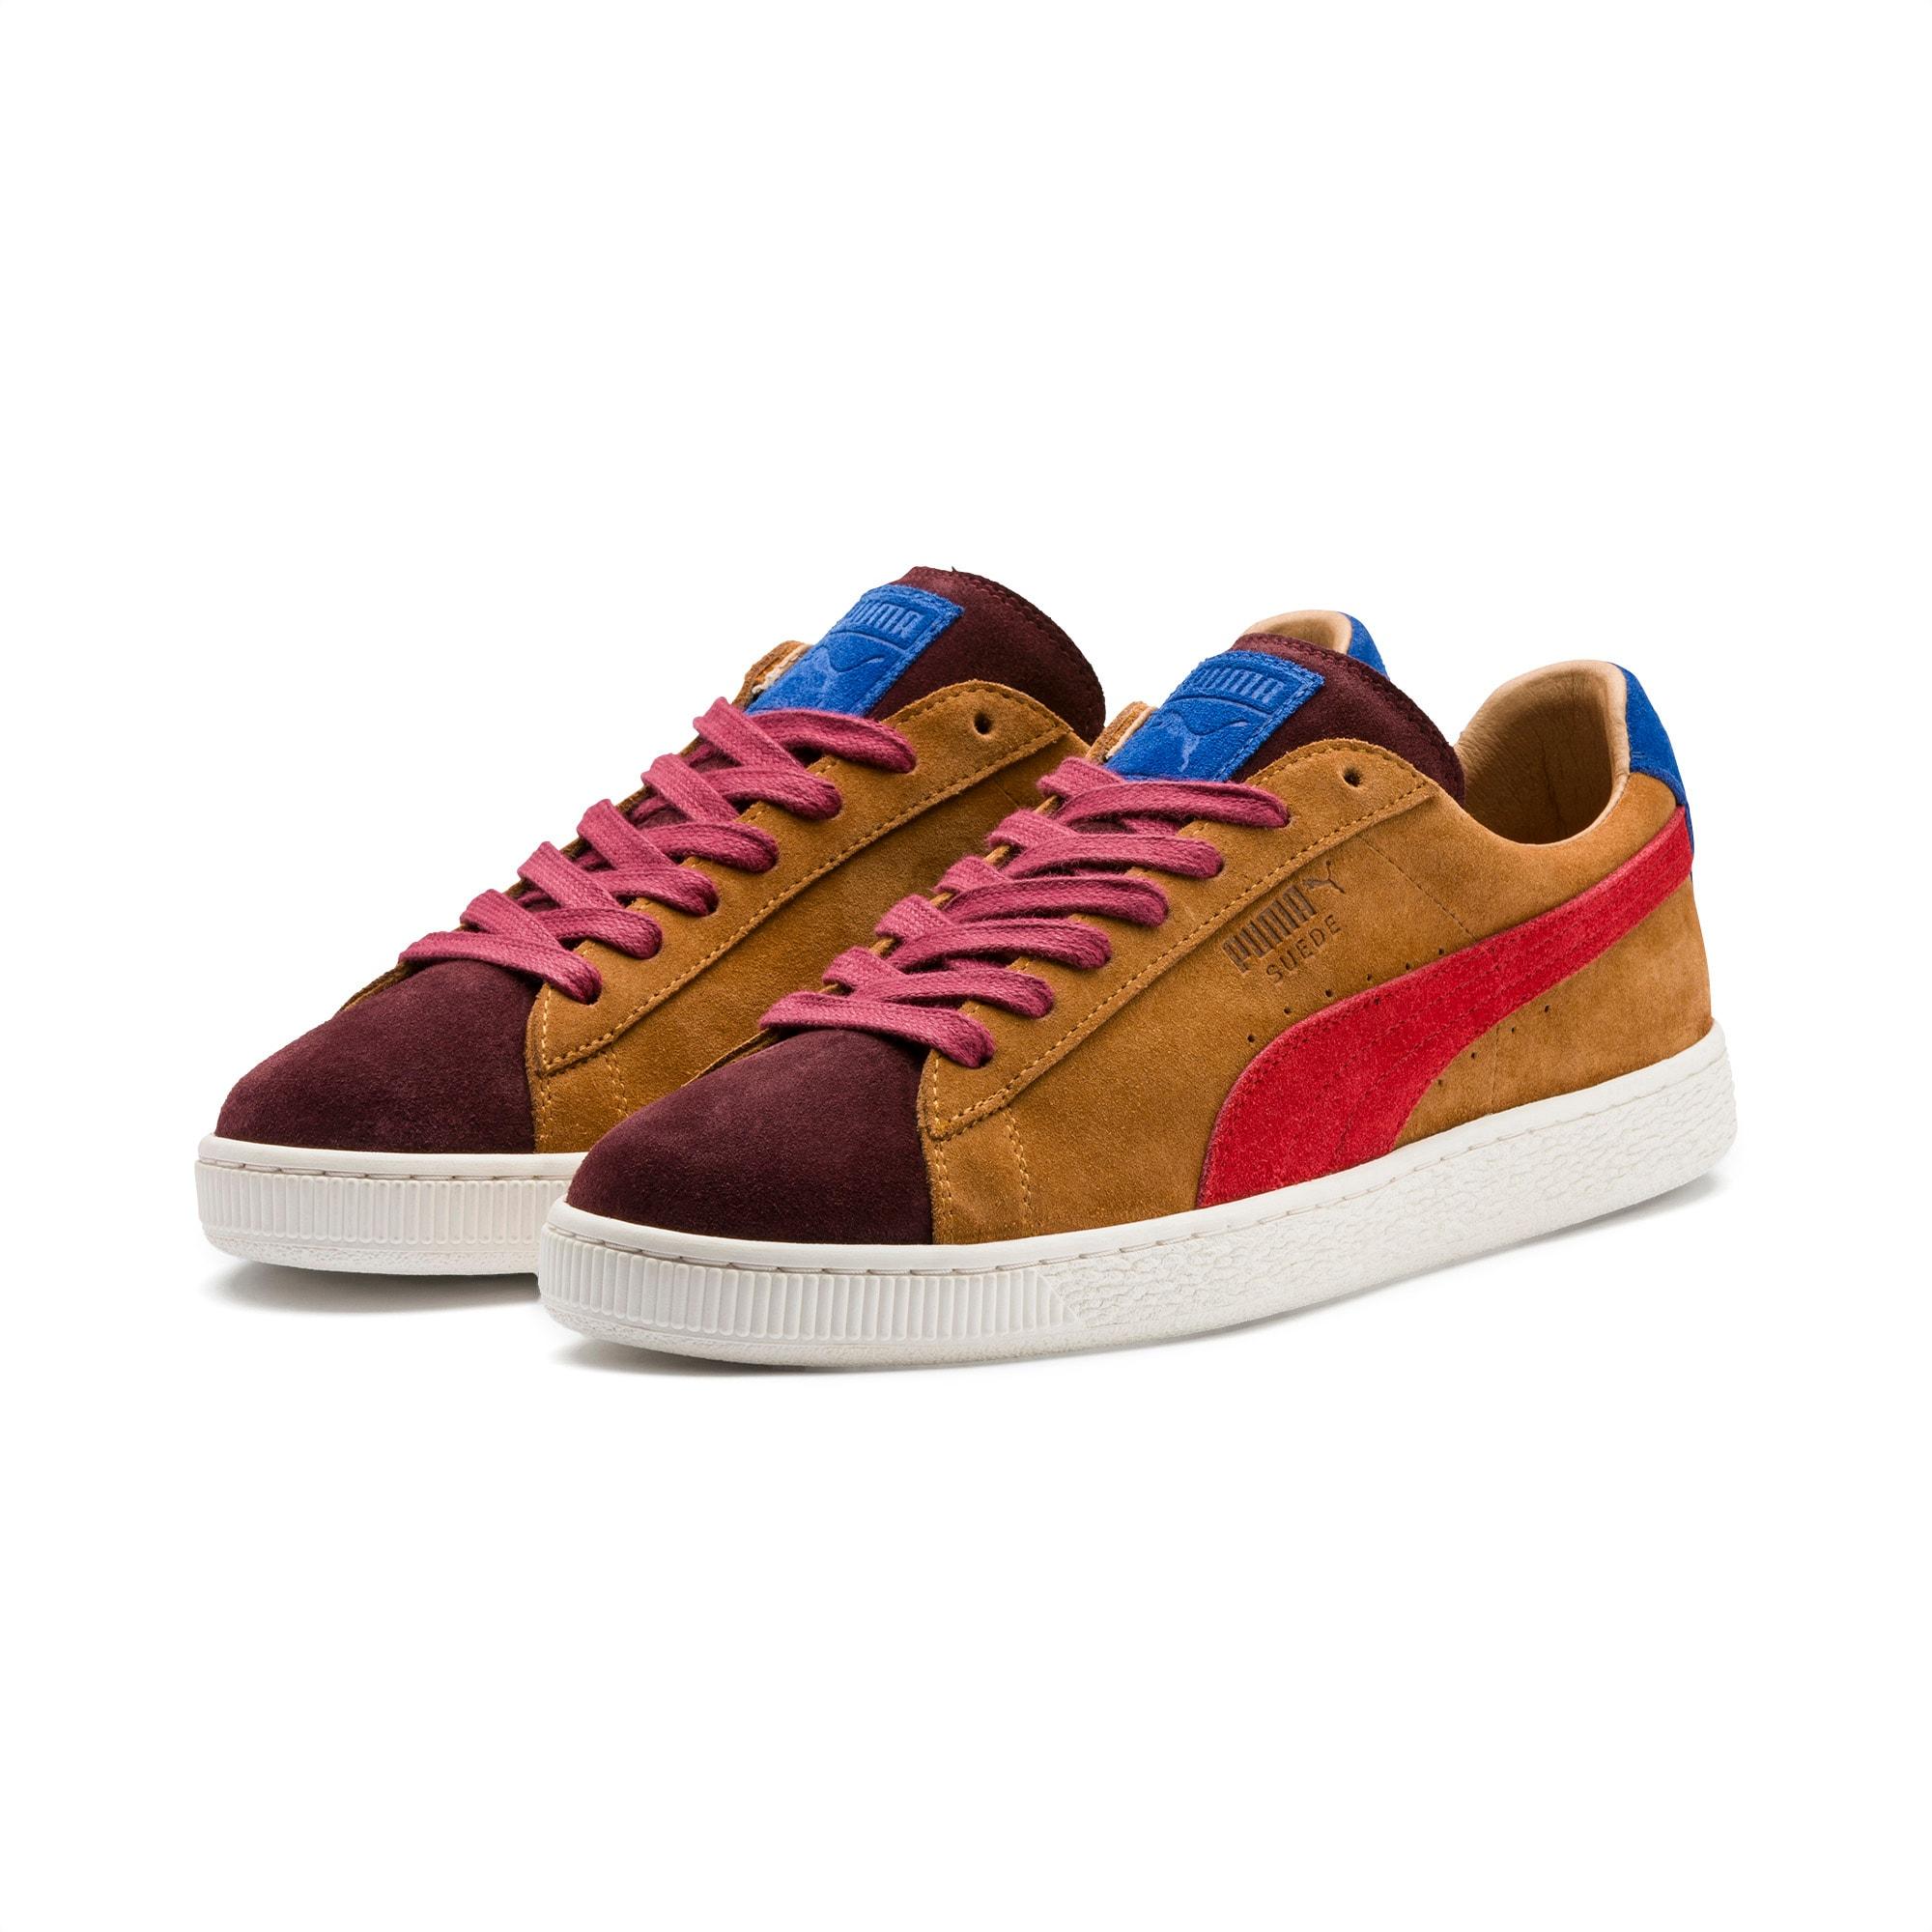 PUMA Suede Mie Men's Sneakers for Men - Lyst